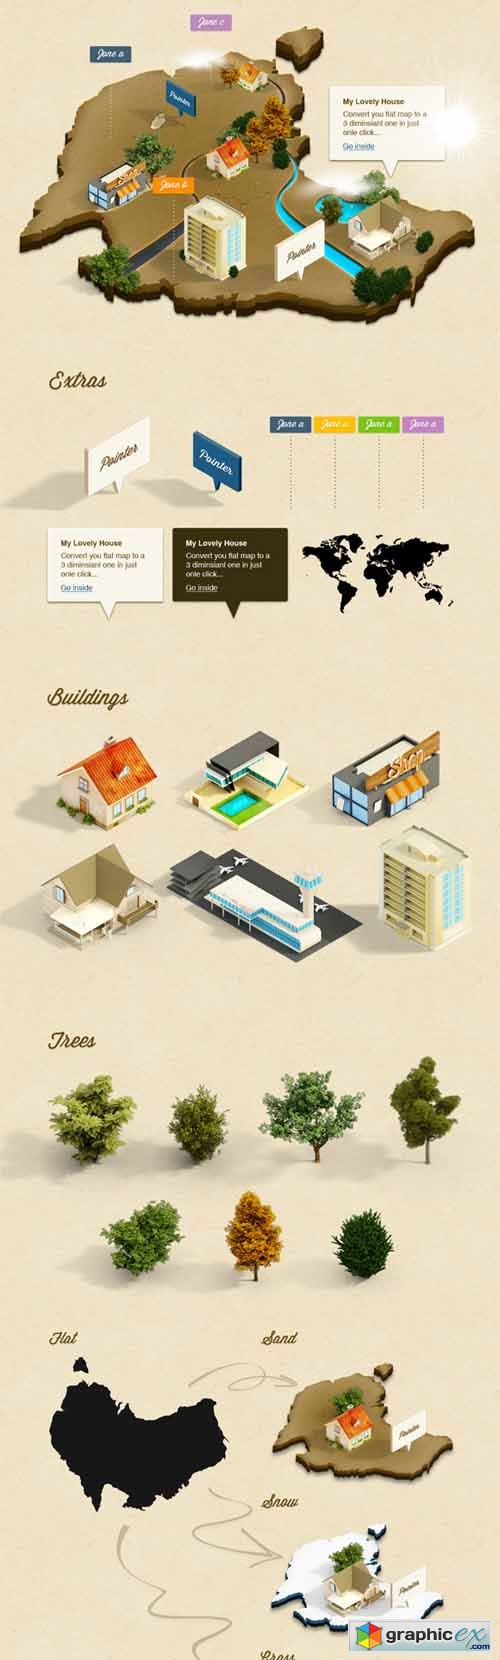 3D Isometric Map (Photoshop Action)